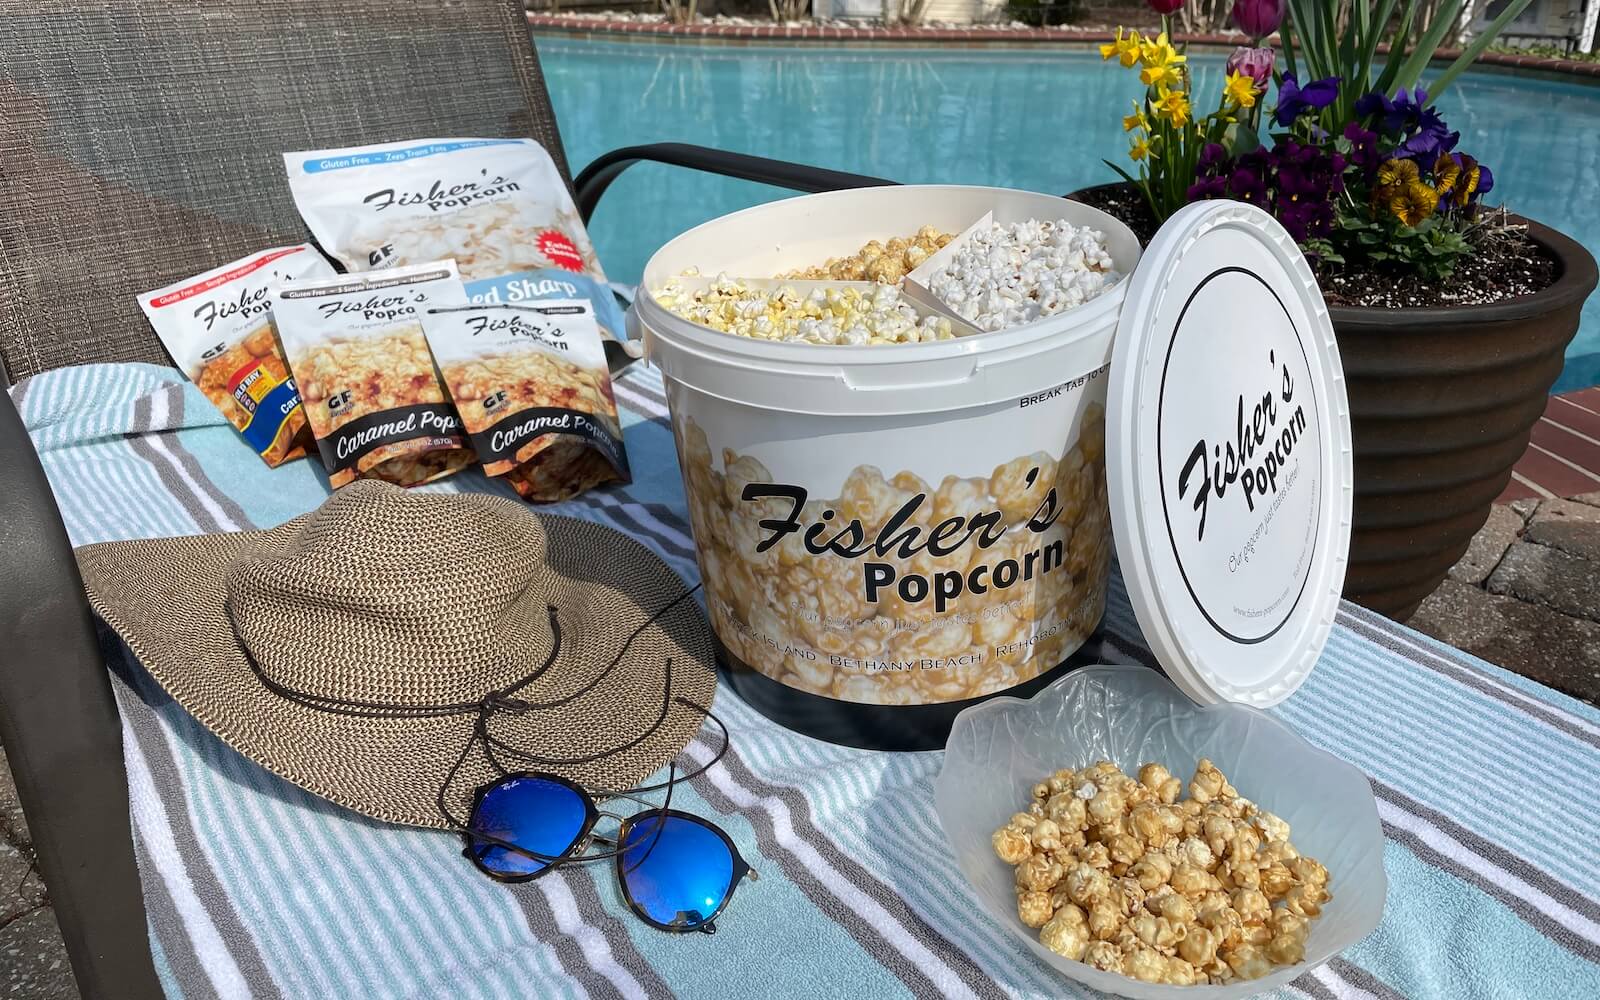 Fishers popcorn is the perfect corporate gift.  Fishers popcorn as a picnic